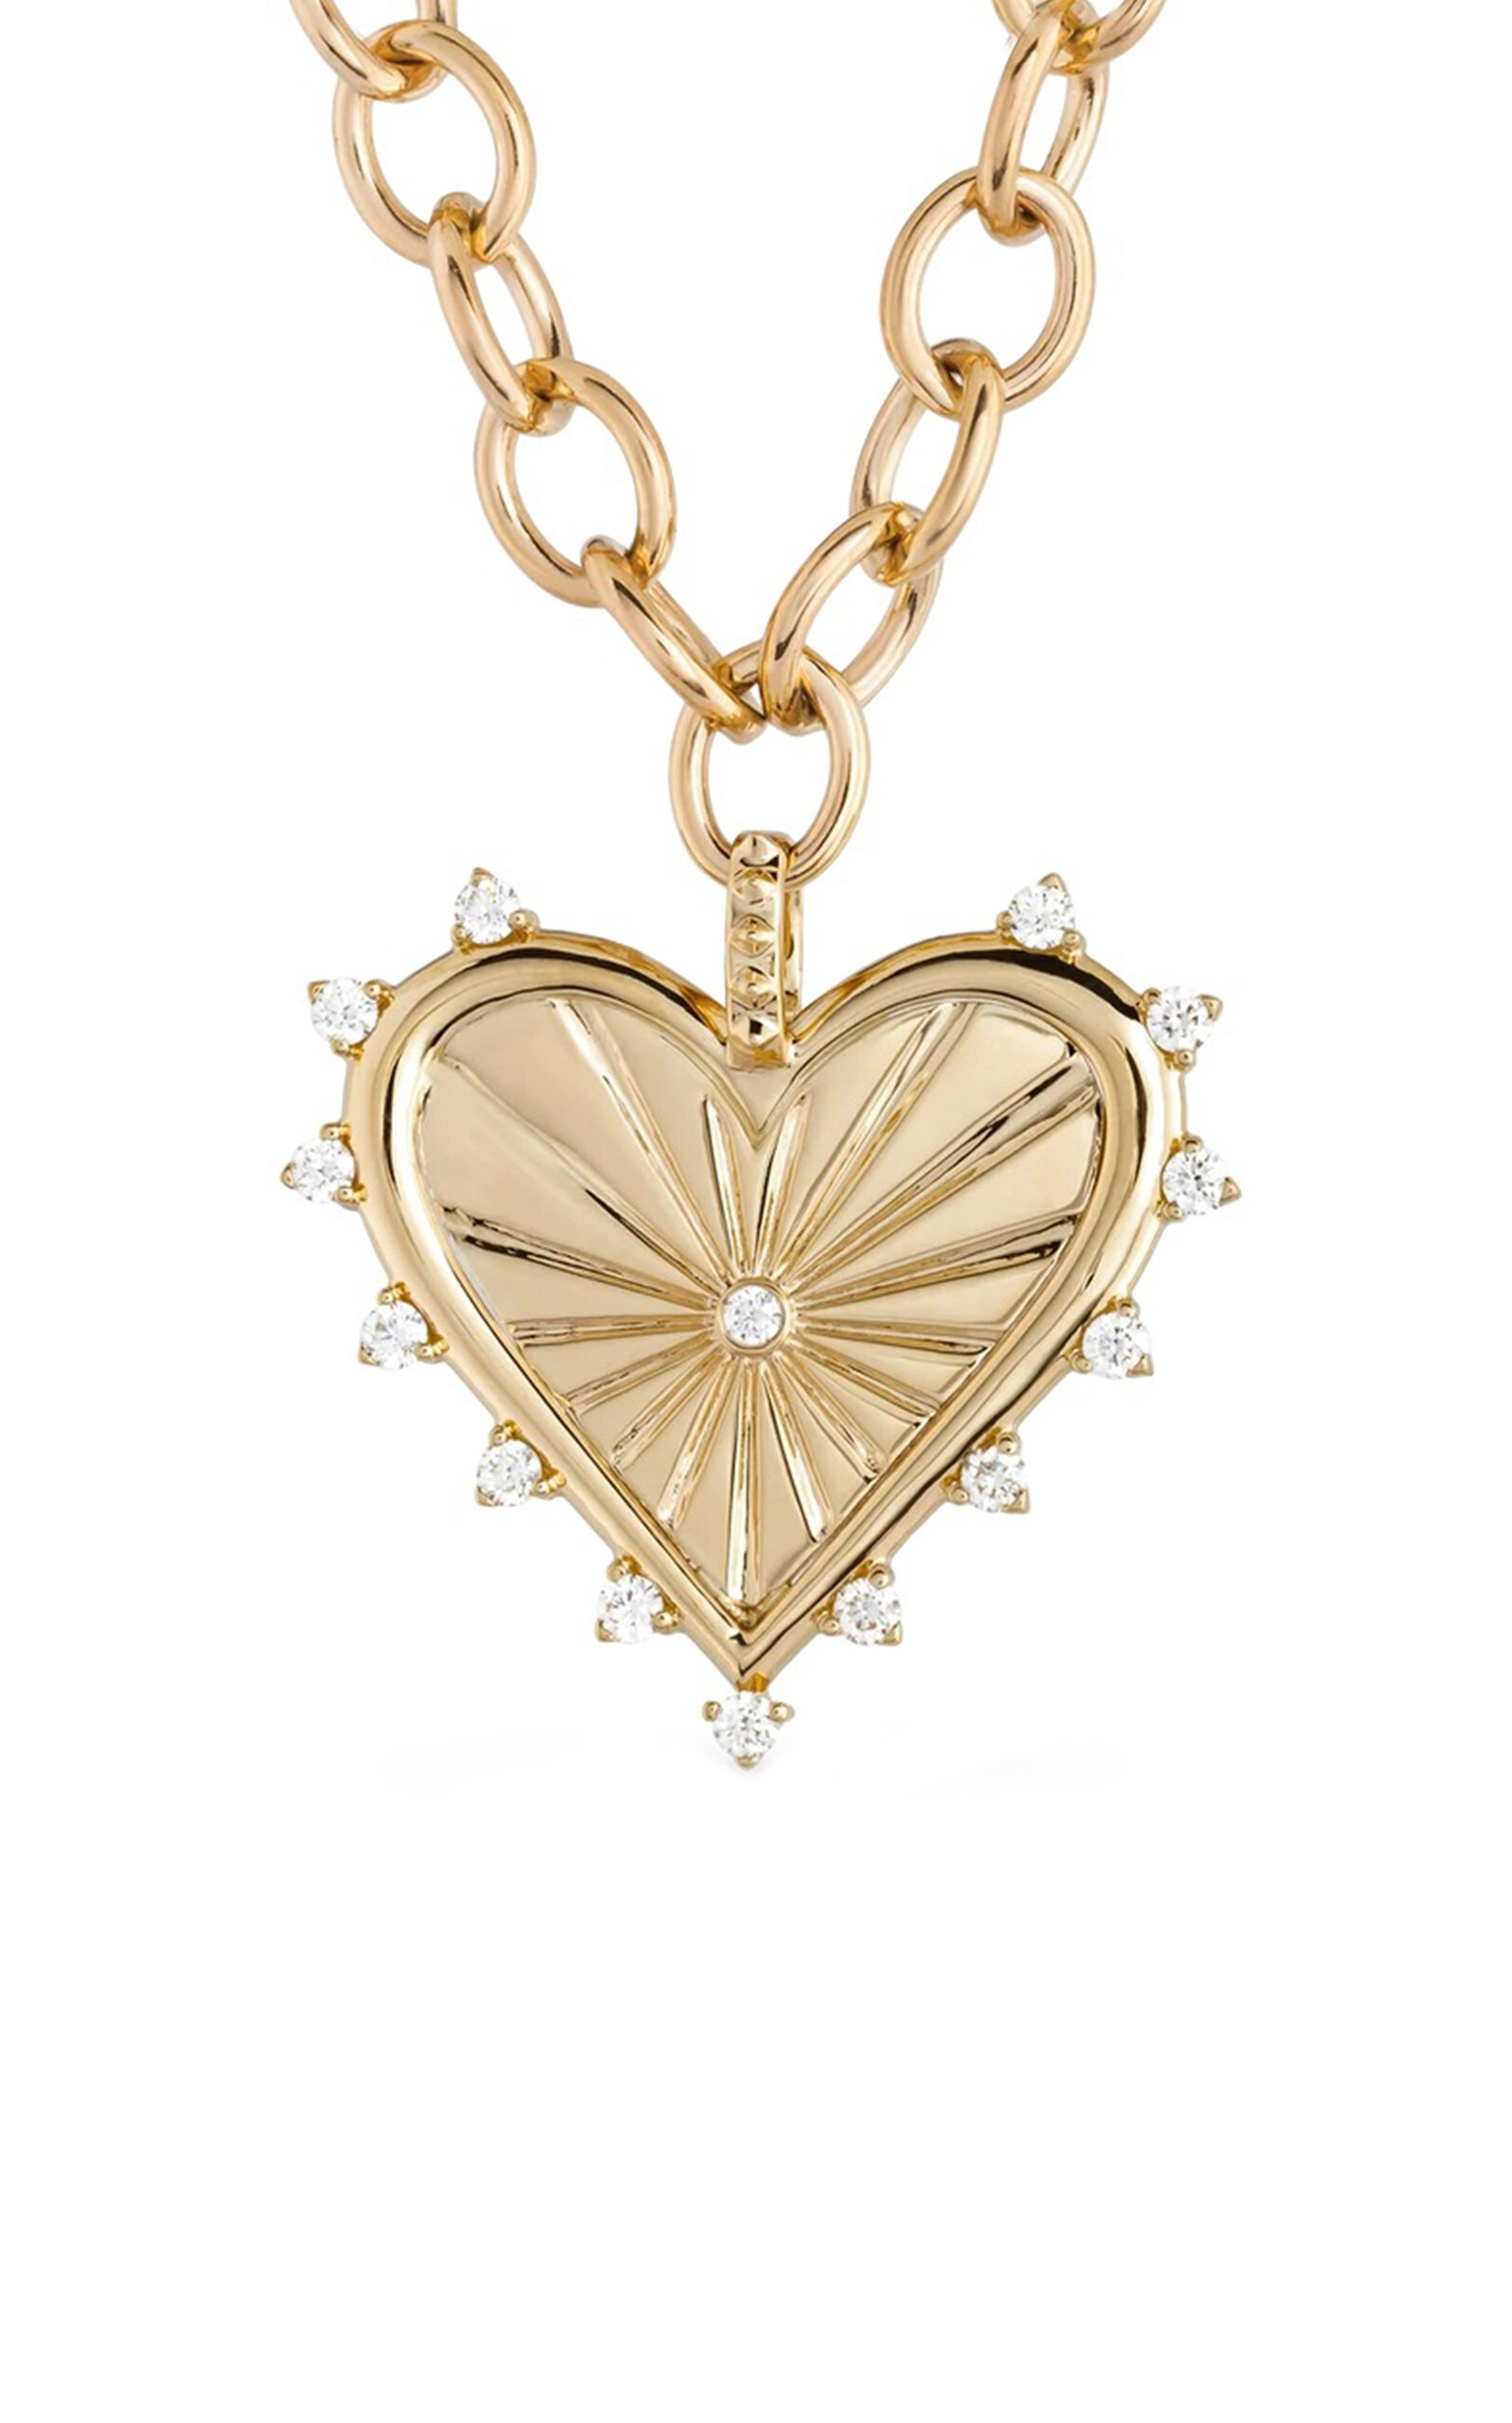 Spiked Heart 14K Yellow Gold Diamond Coin Necklace